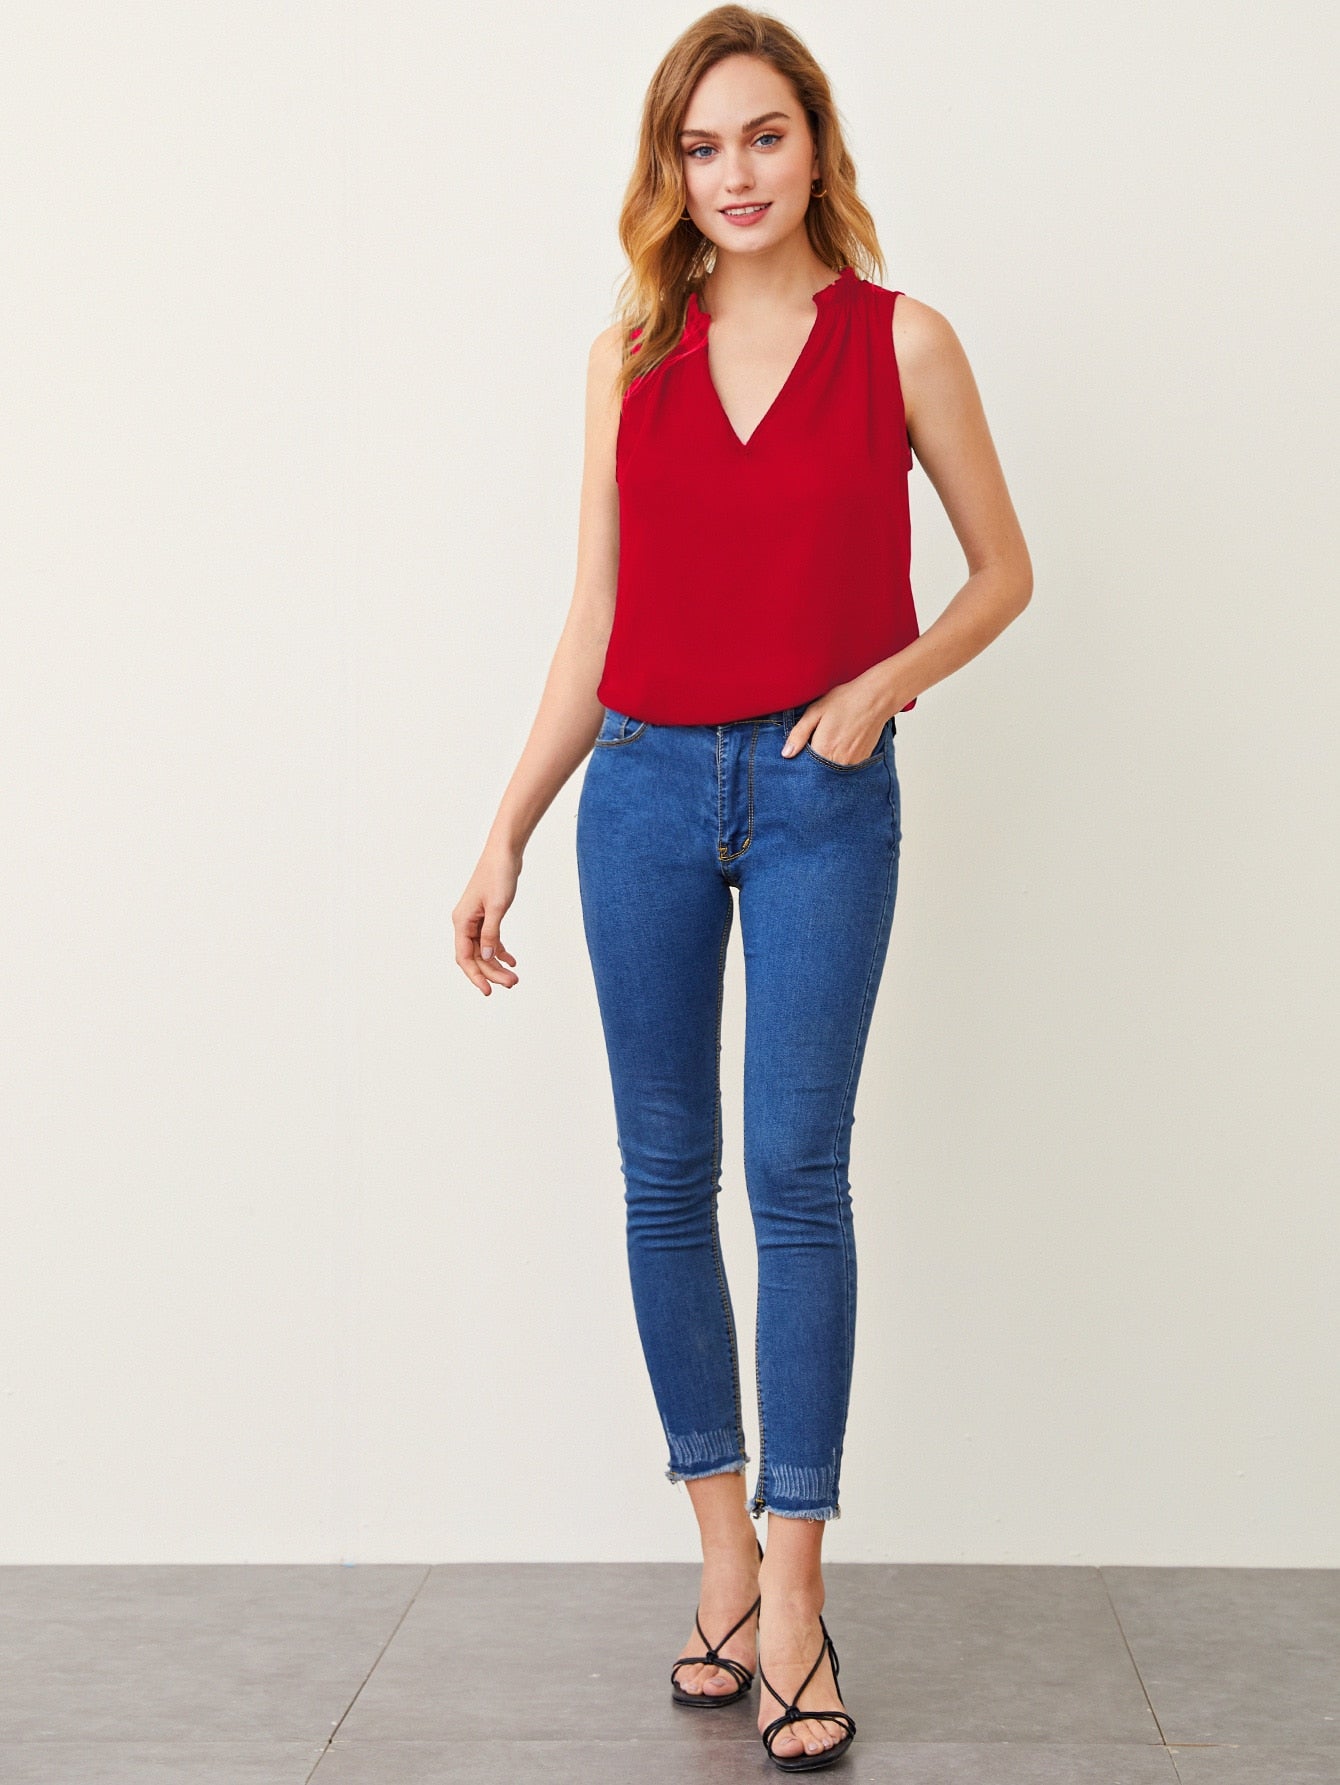 Notched Neck Frill Trim Top